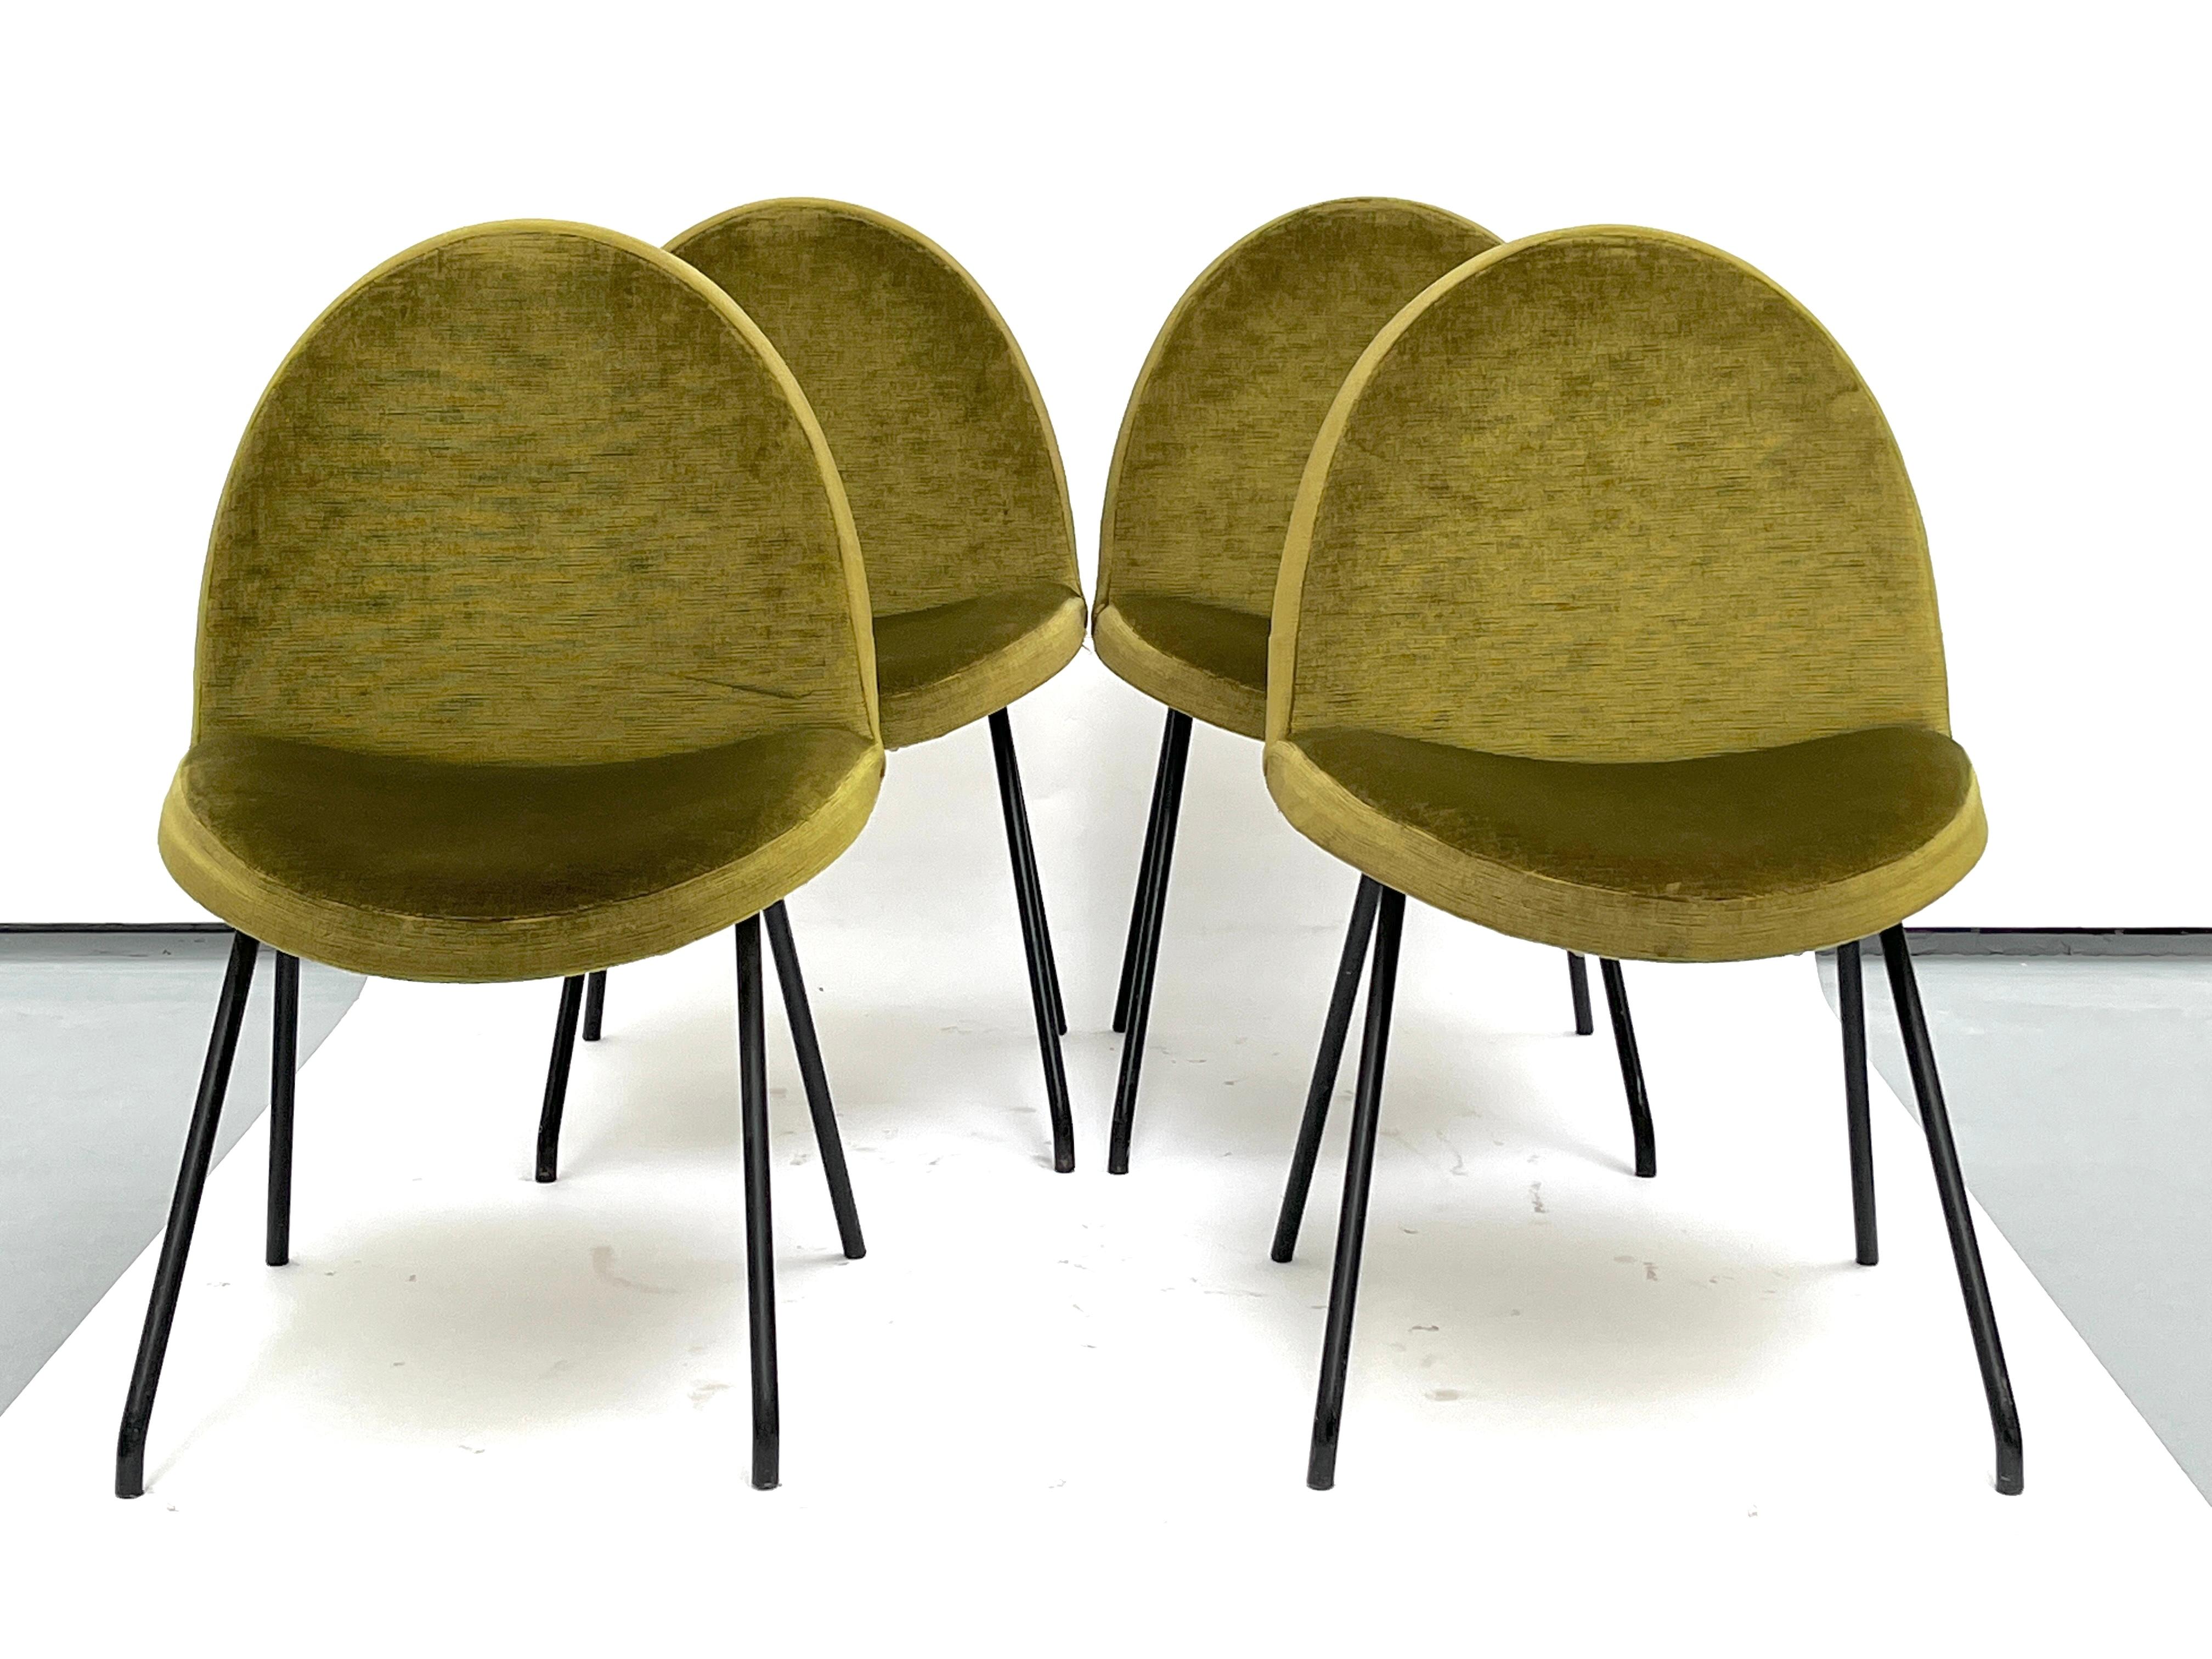 Lacquered Four Green Chairs 771 by Joseph André Motte, Steiner, 1958 For Sale